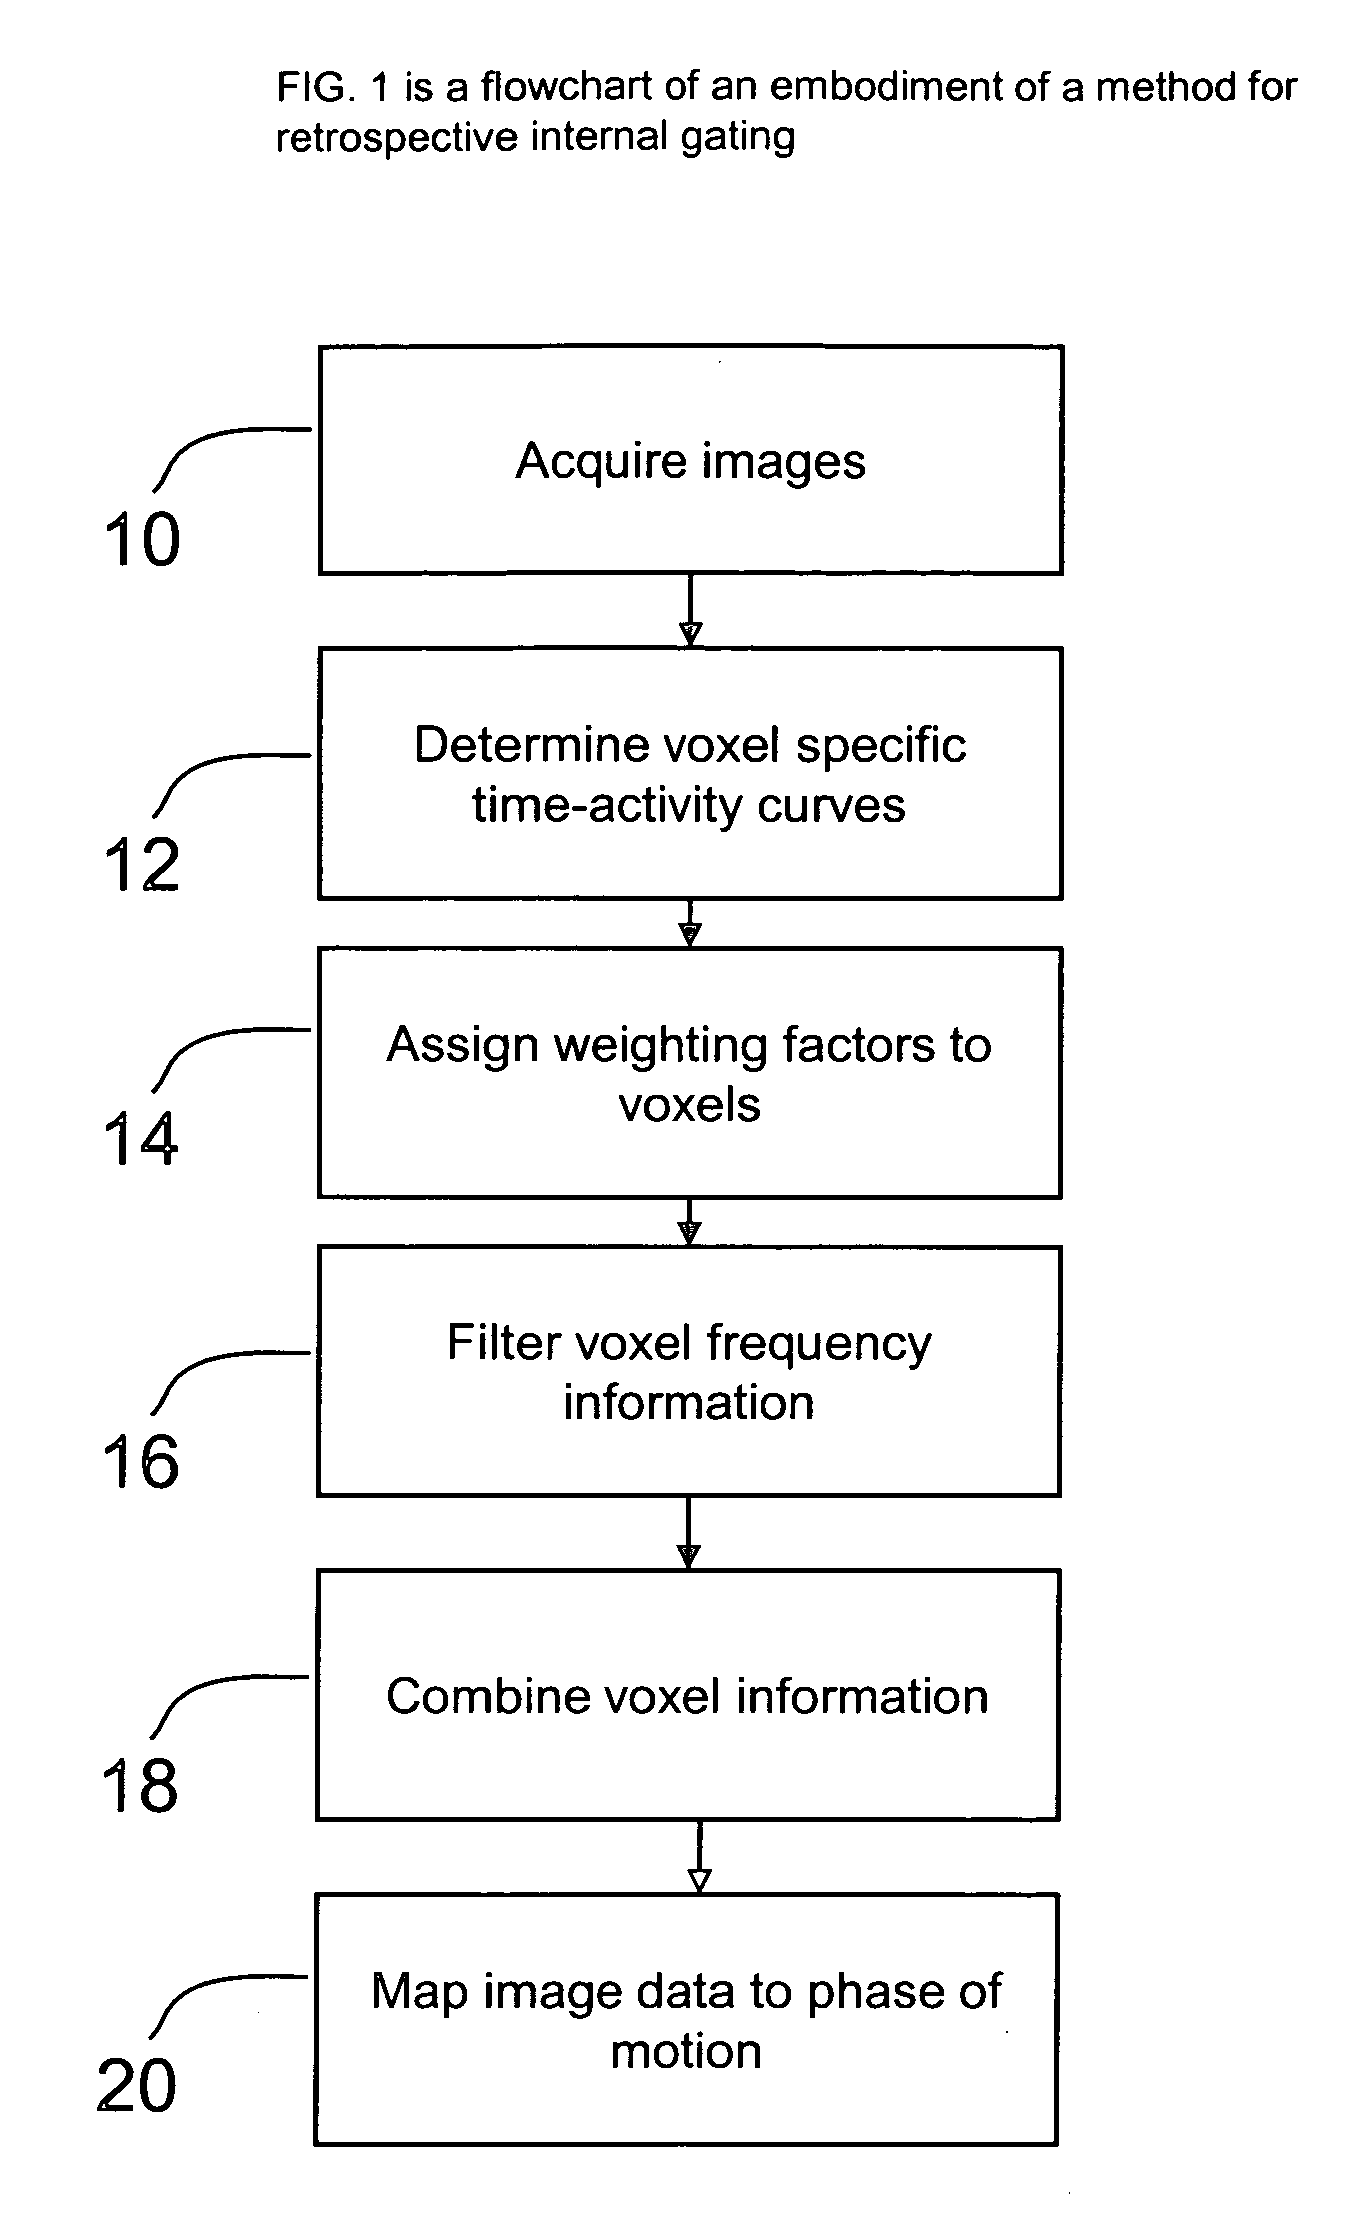 Methods and systems for retrospective internal gating